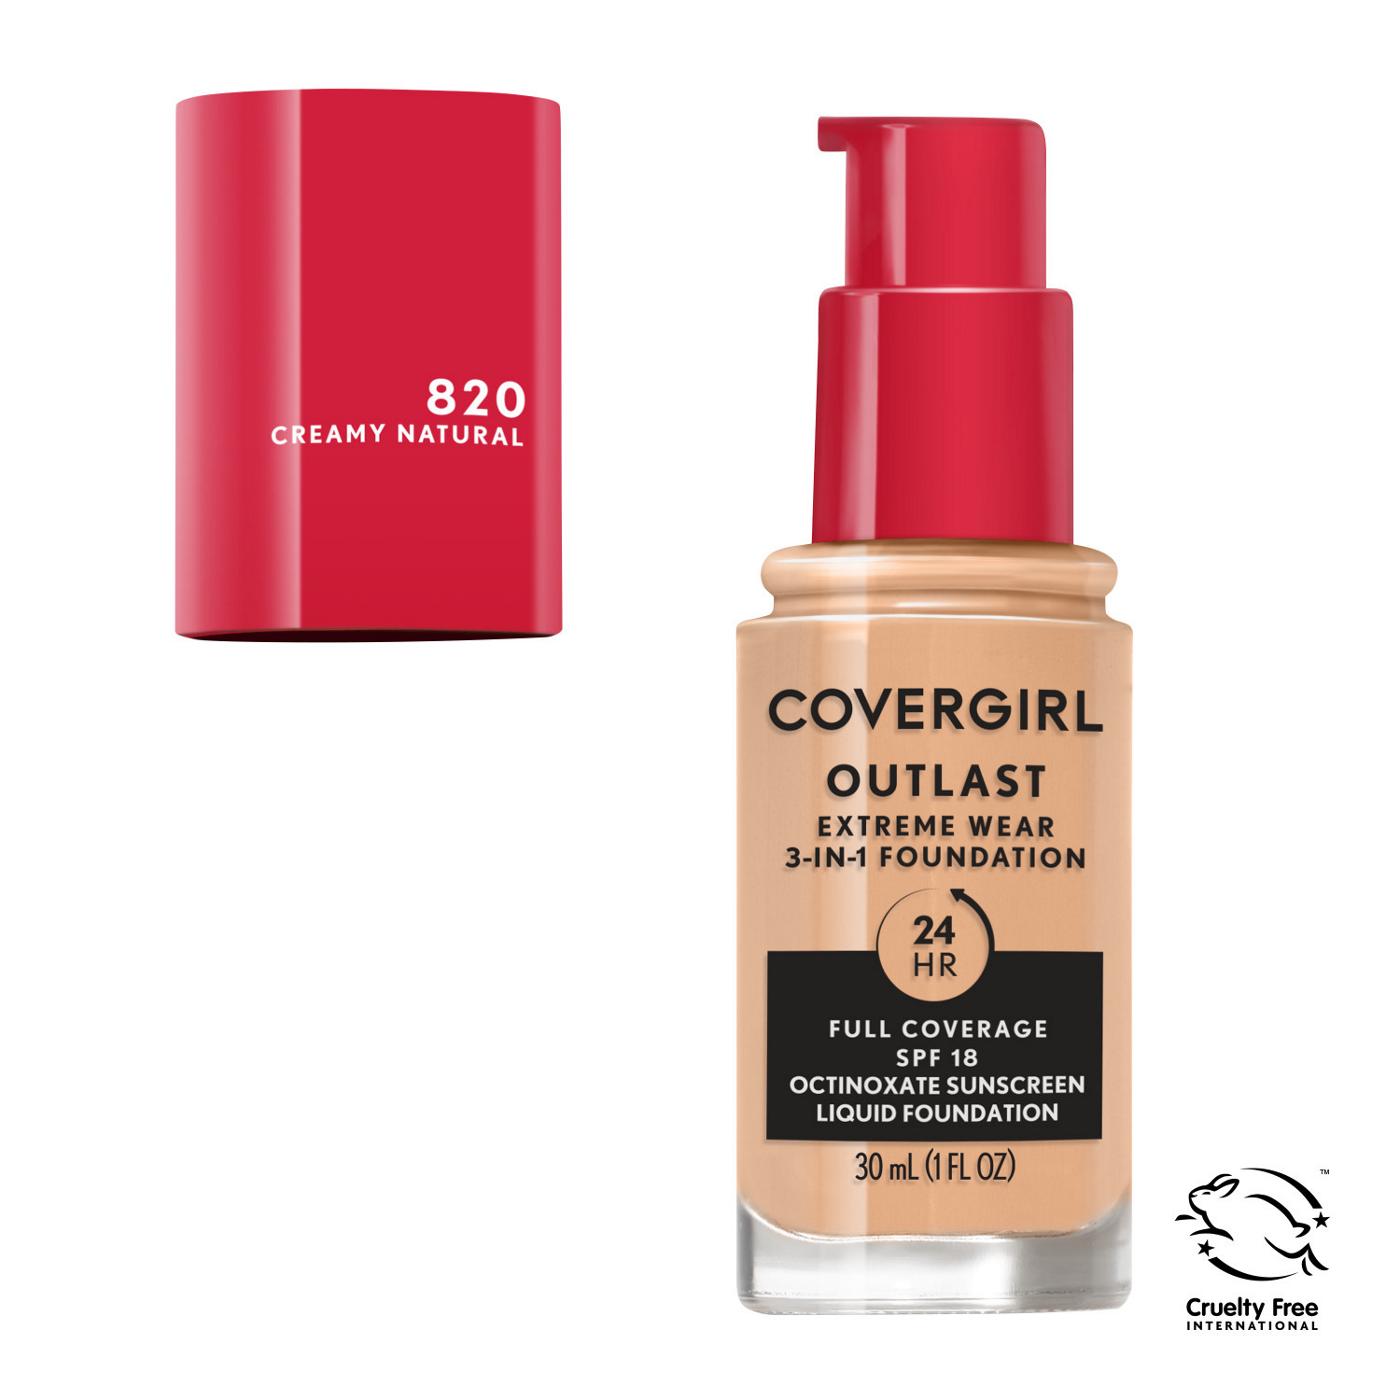 Covergirl Outlast Extreme Wear Liquid Foundation 820 Creamy Natural; image 6 of 11